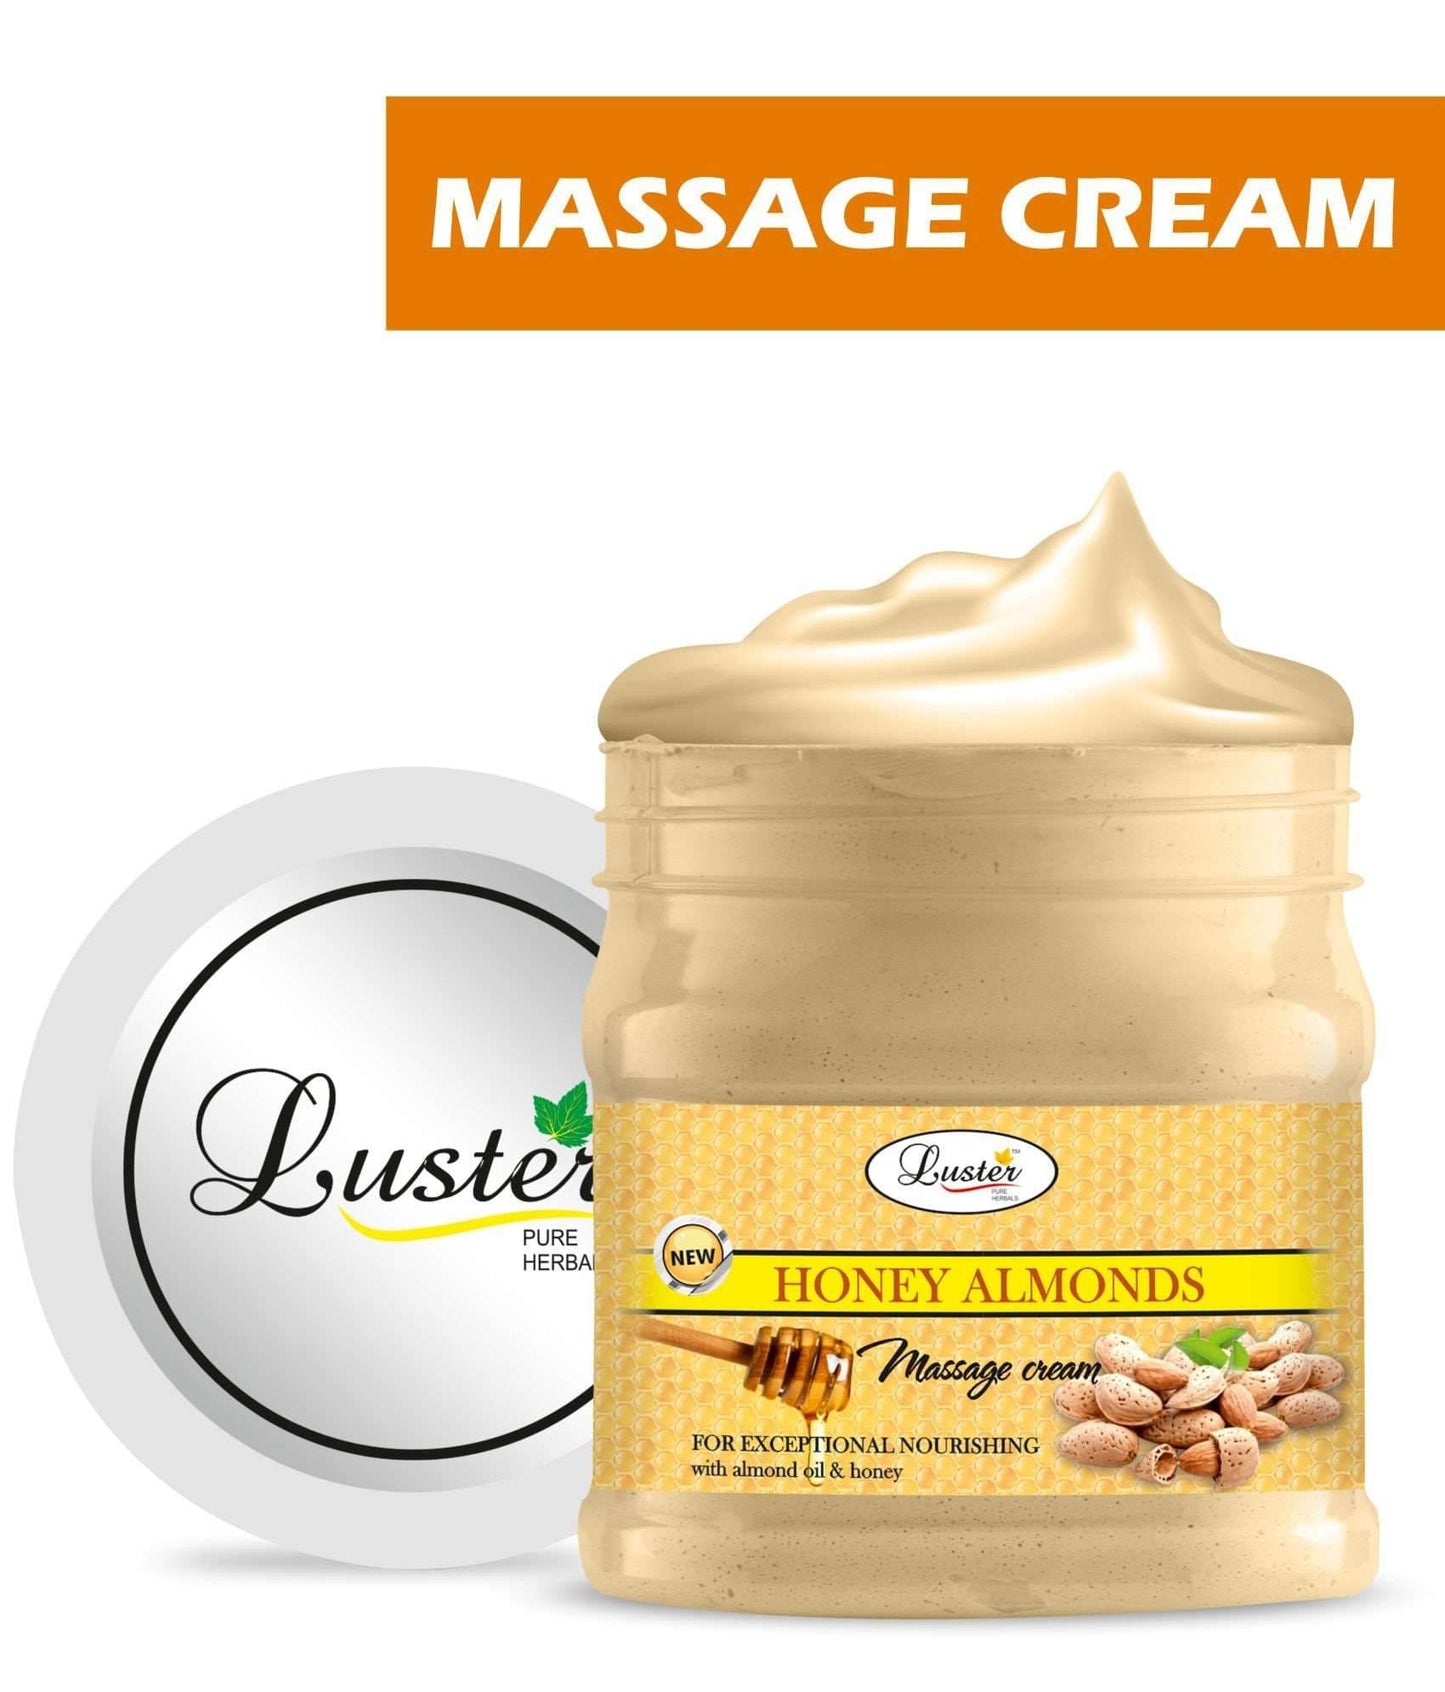 Luster Honey Almonds Exceptional Nourishing Facial Massage Cream (Paraben & Sulfate Free)-500ml - Luster Cosmetics